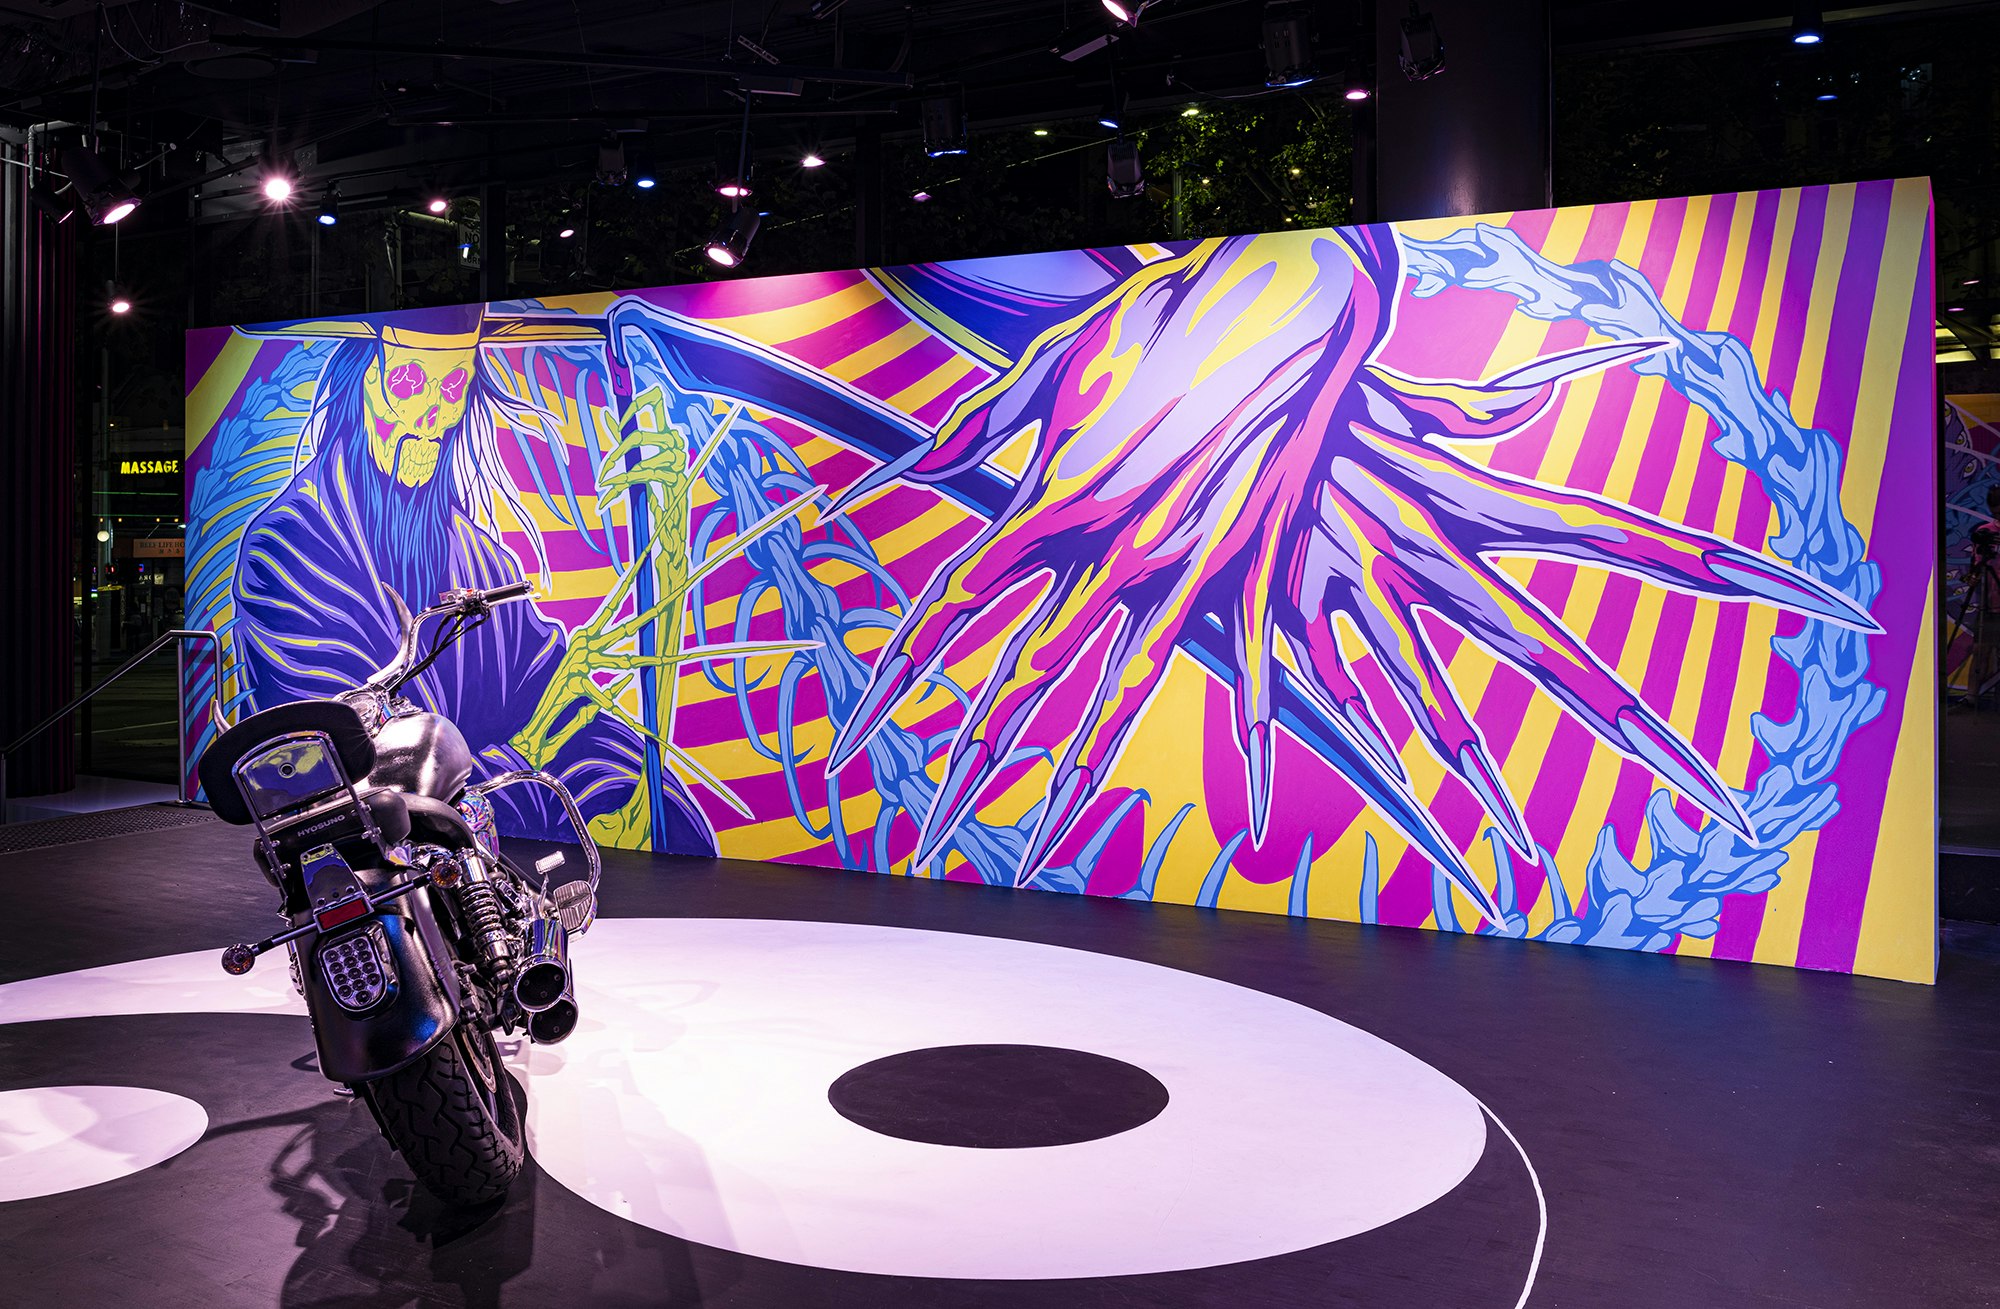 A chrome motorbike is parked in front of a mural with two neon pink, yellow and purple hands crossed over each other. Each hand is the height of the wall and adorned with long pointed fingernails. The hands overlap with a green skeletal Grim Reaper figure in a purple cloak, long blue hair and green skeletal hands holding a purple scythe.